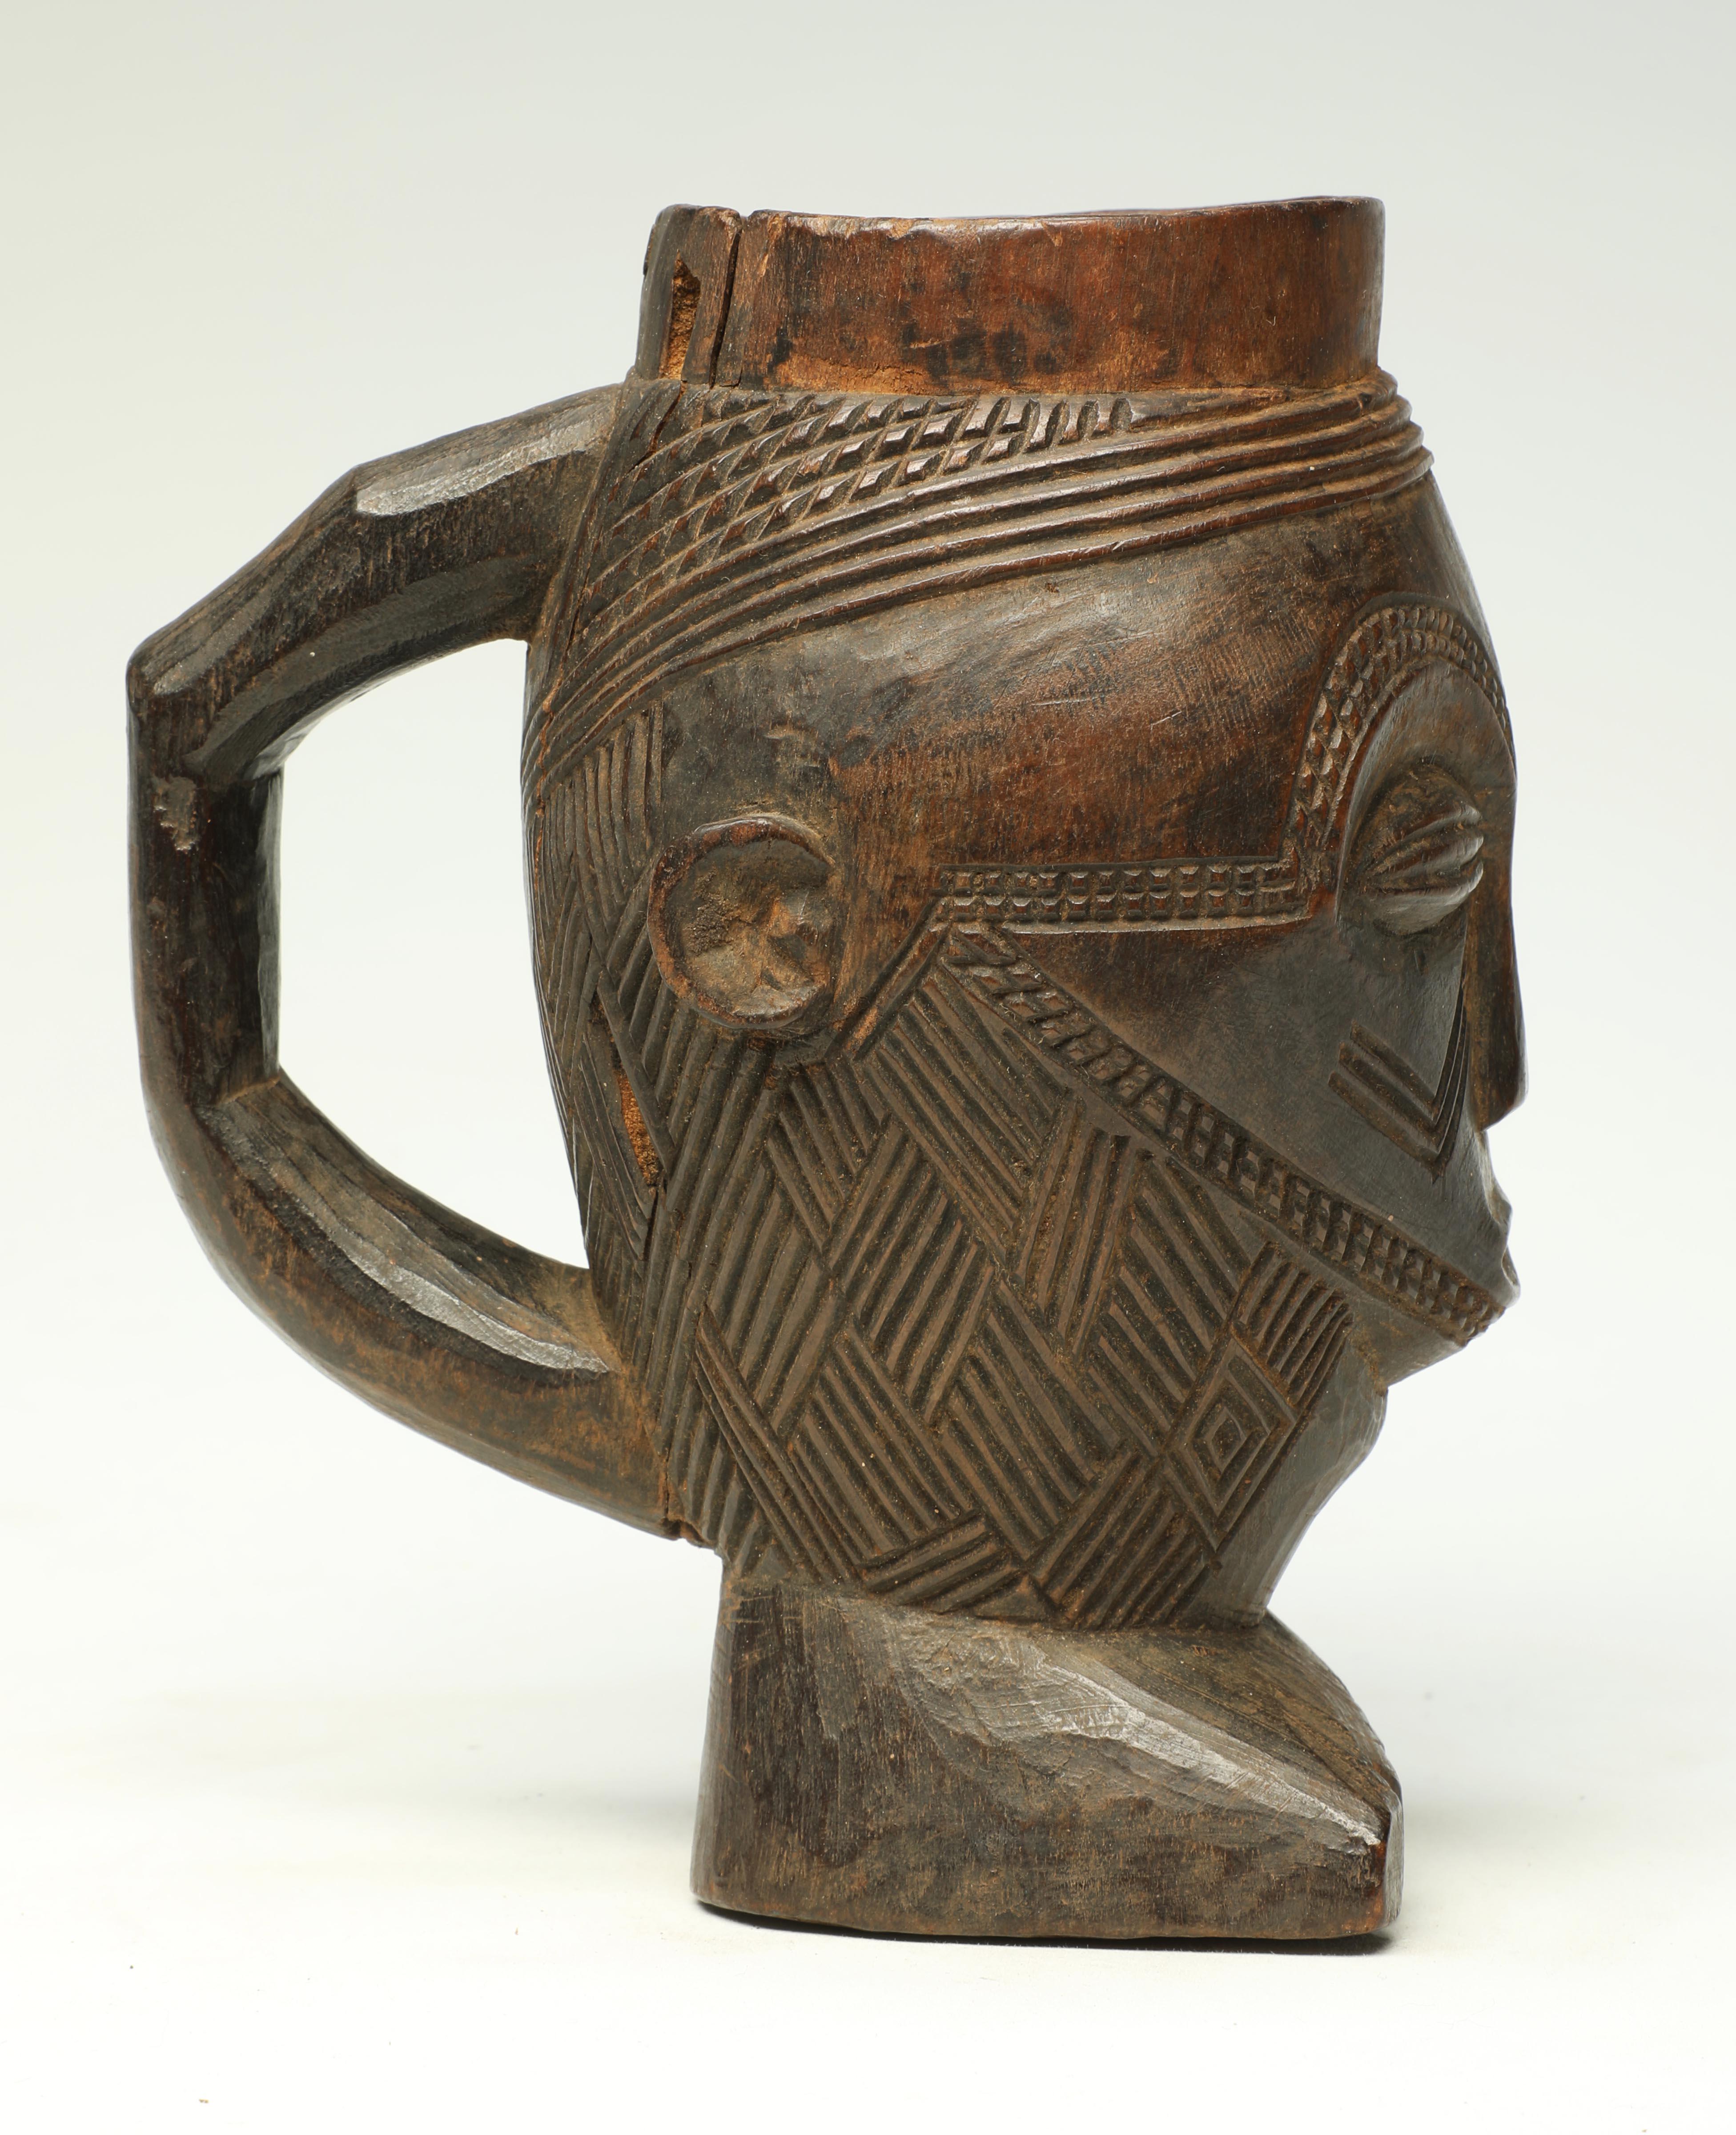 Early finely carved hard wood Kuba figural cup, Congo with rich patina. In the form of a stylized face with the base of the cup a foot. Great incised classic Kuba crisscross design for hair. Deep patina from extensive use, early 20th century. Small